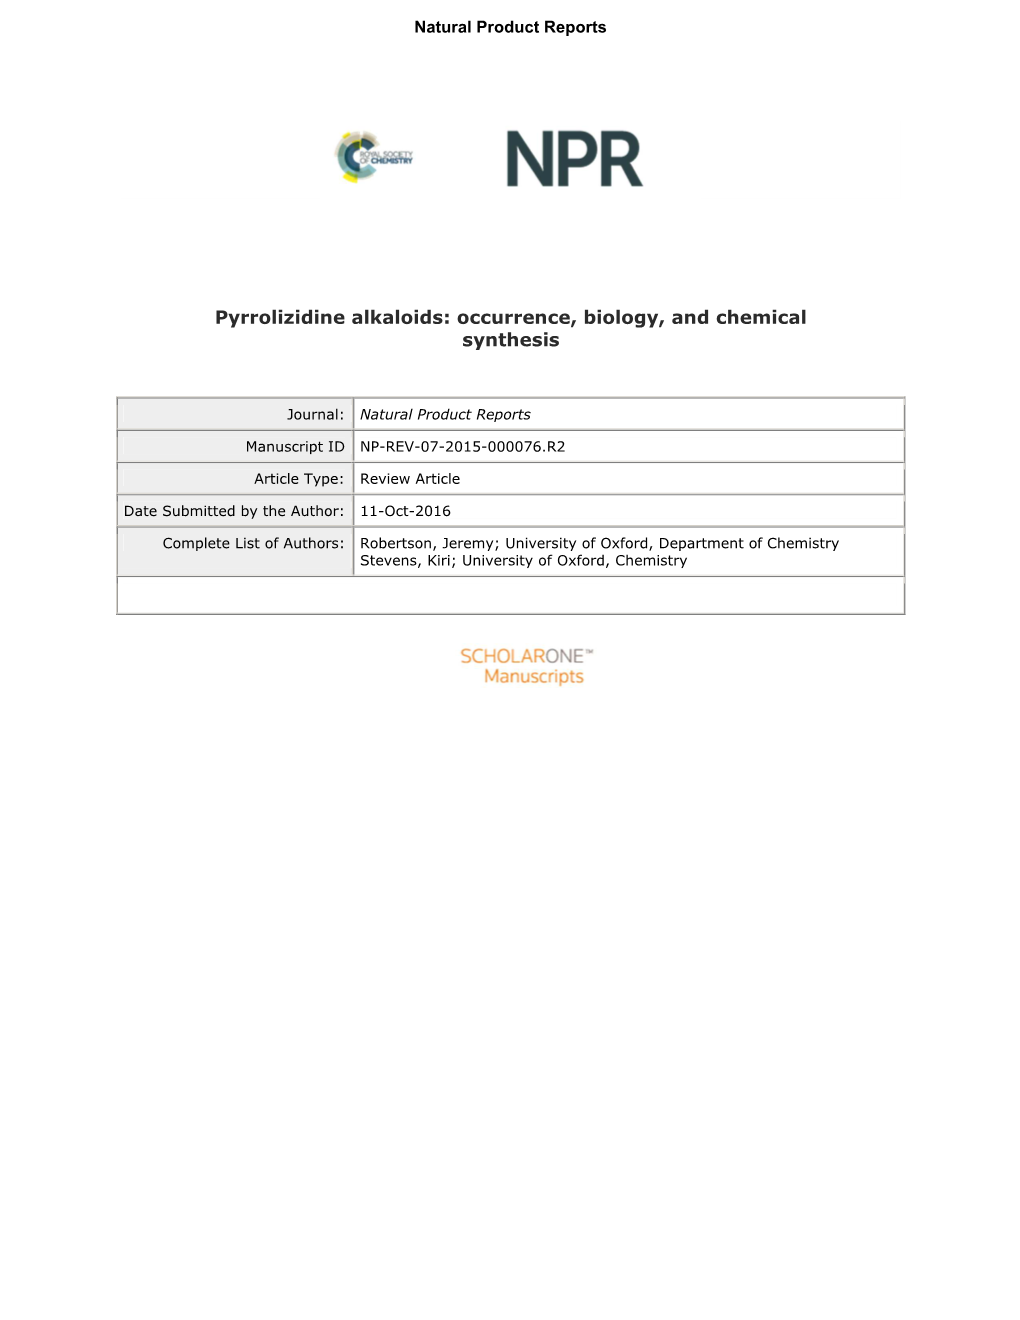 Pyrrolizidine Alkaloids: Occurrence, Biology, and Chemical Synthesis